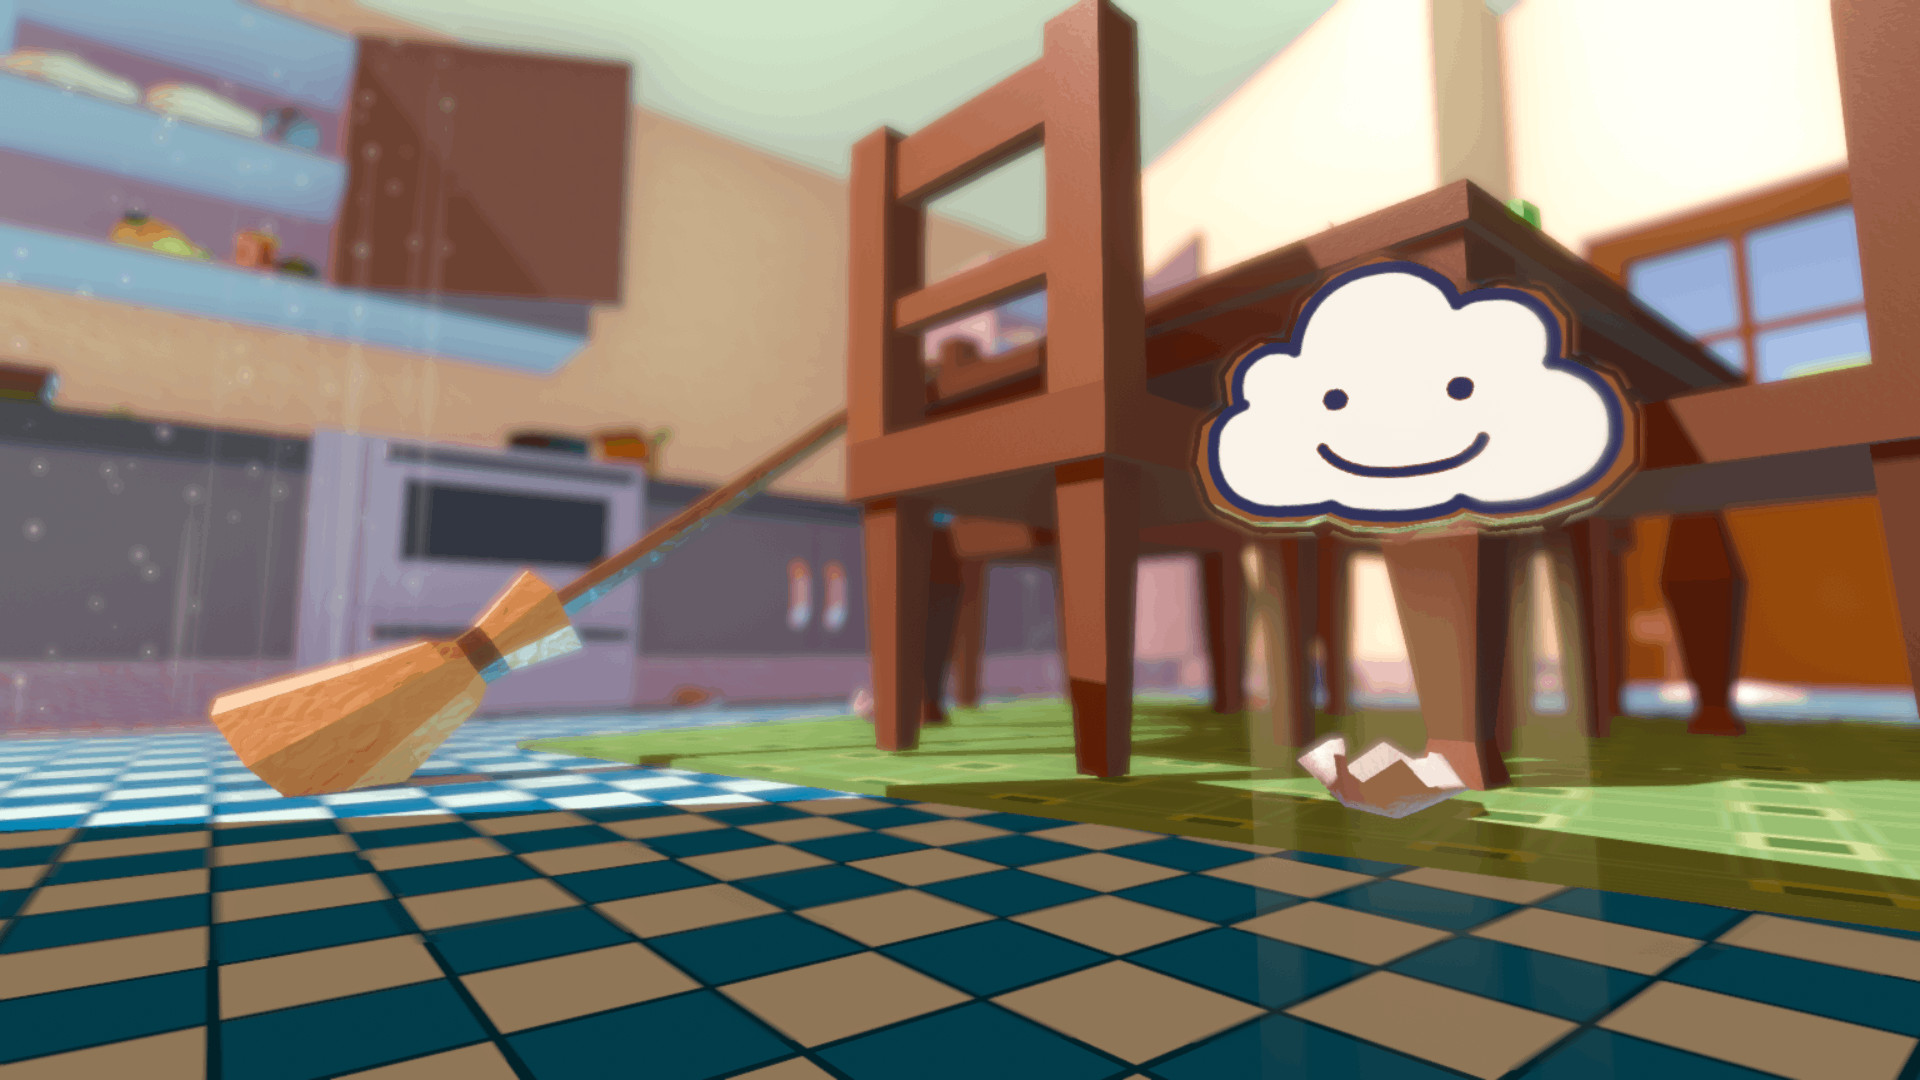 Rain on Your Parade on Steam